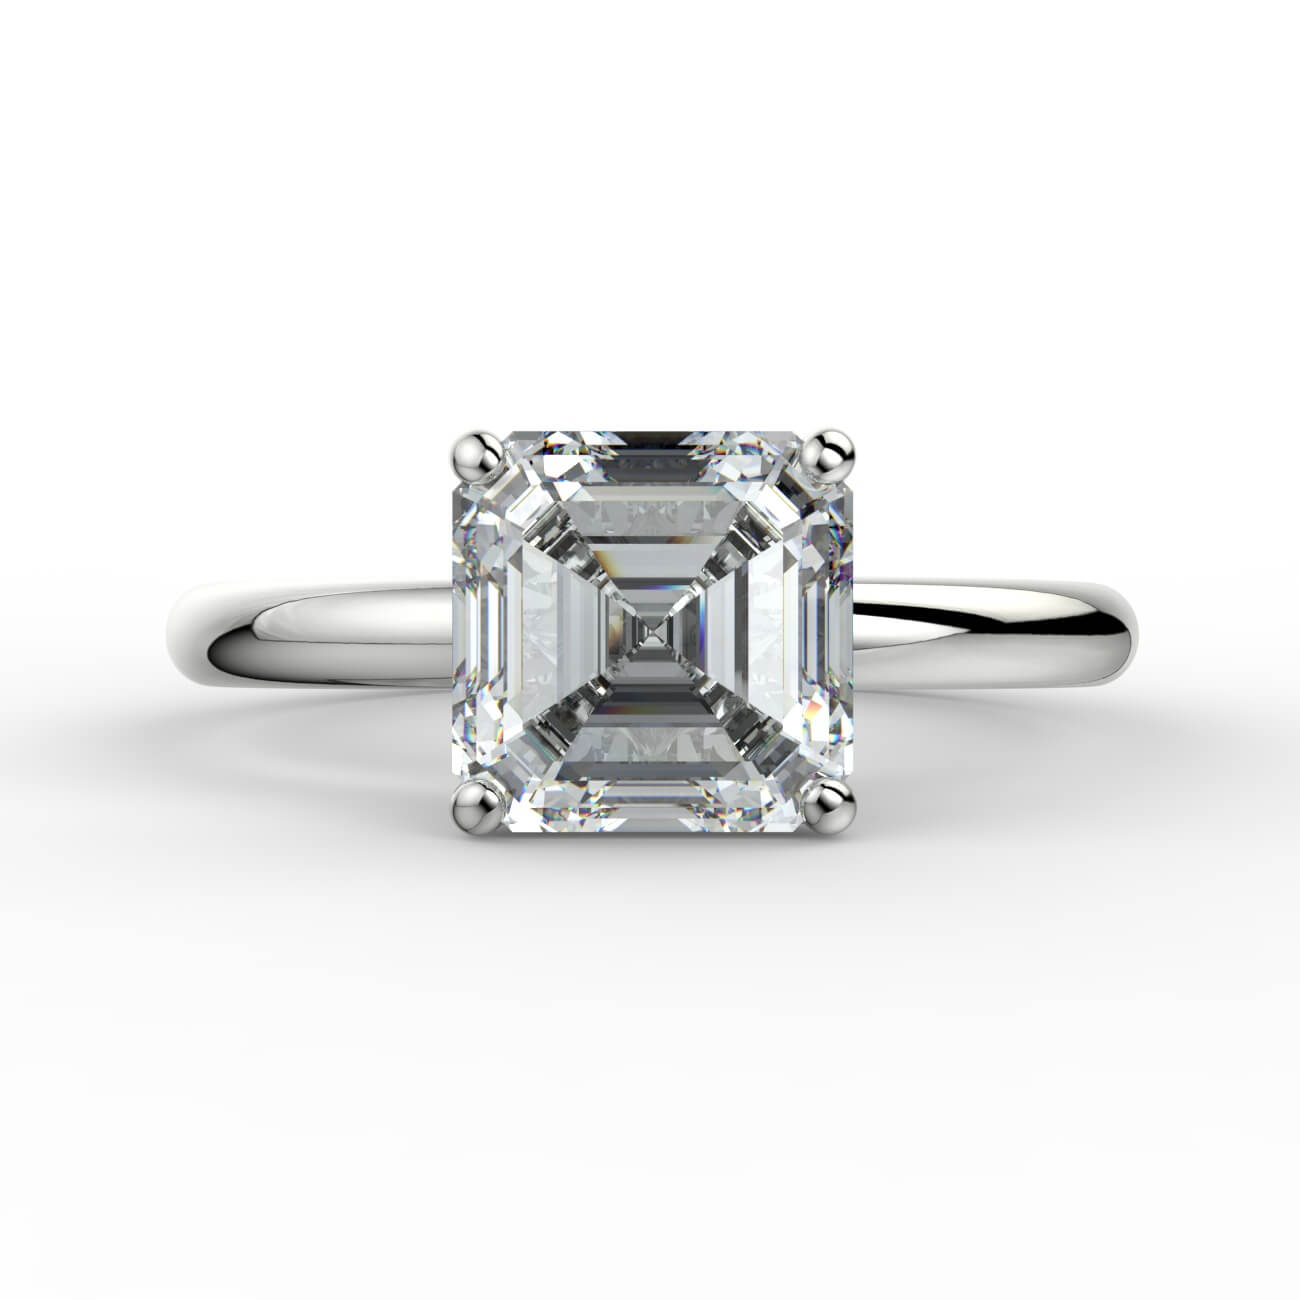 Comfort fit 4 claw asscher cut solitaire diamond ring in white gold – Australian Diamond Network